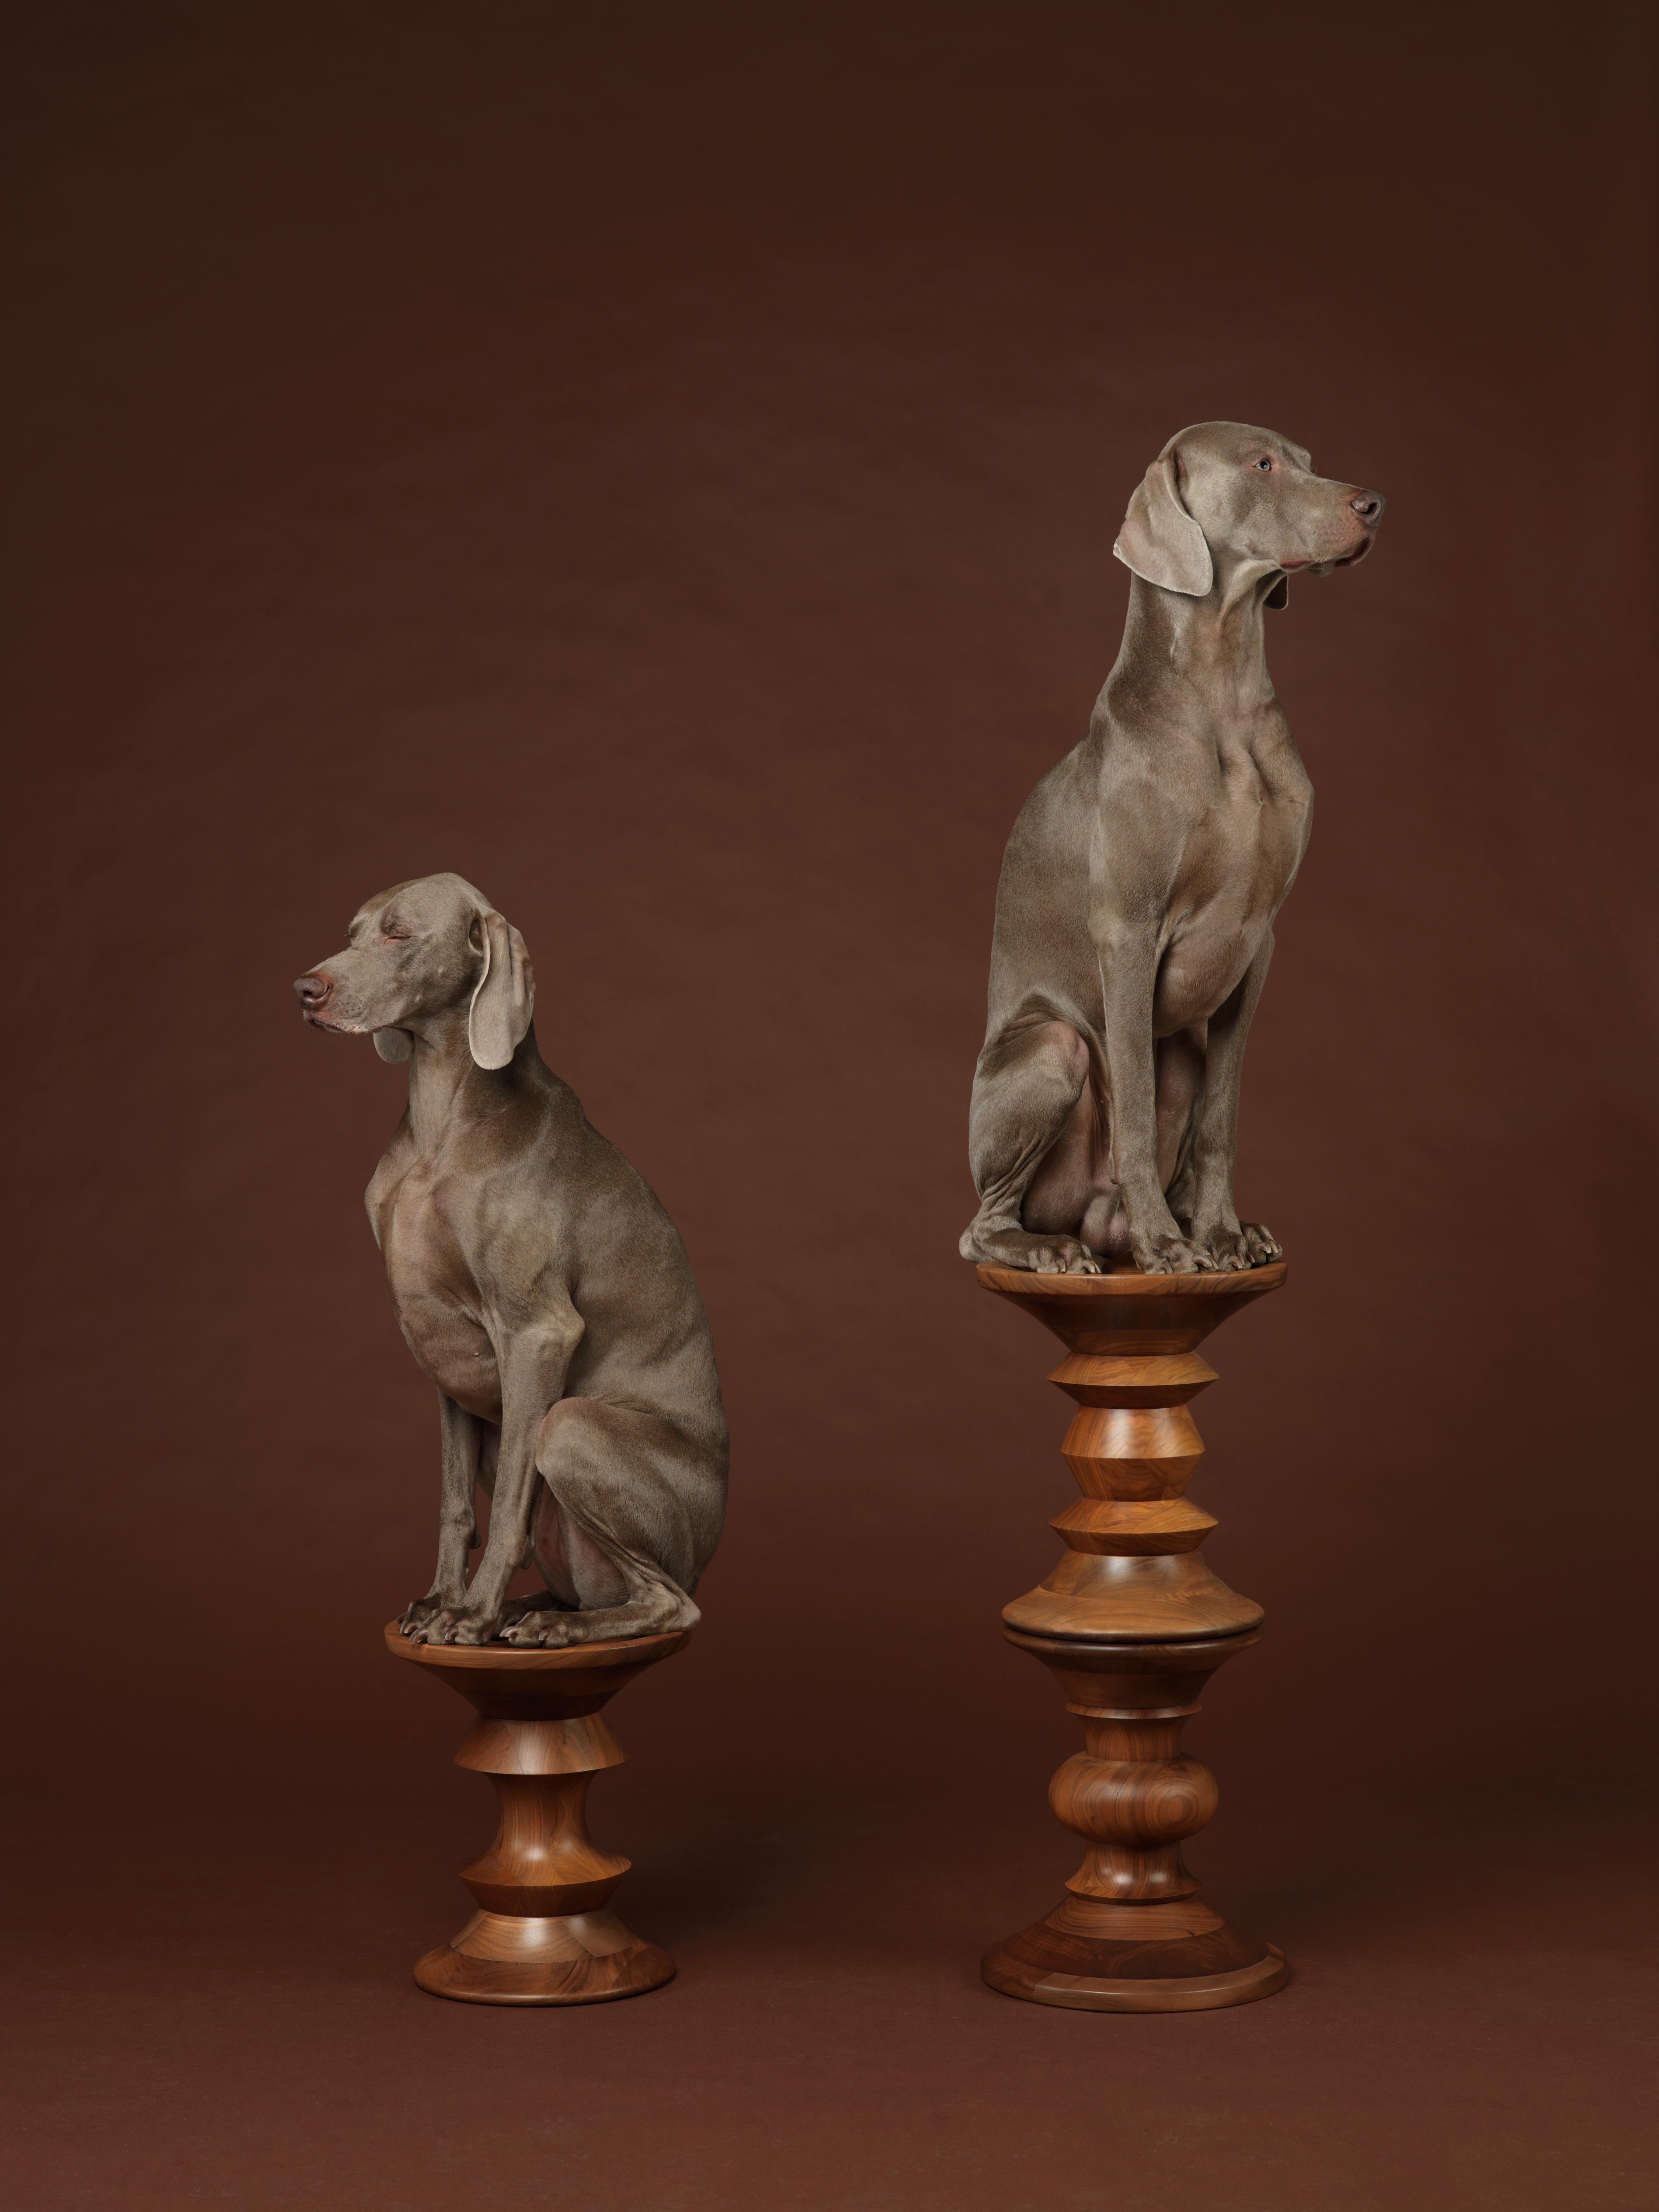 Pawns - William Wegman (Colour Photography)
Signed and numbered on label affixed to reverse of mount
Pigment print
44 x 34 inches
From an edition of 7 

The dogs, bewigged and bedecked with outfits and props, demonstrate a wide range of human